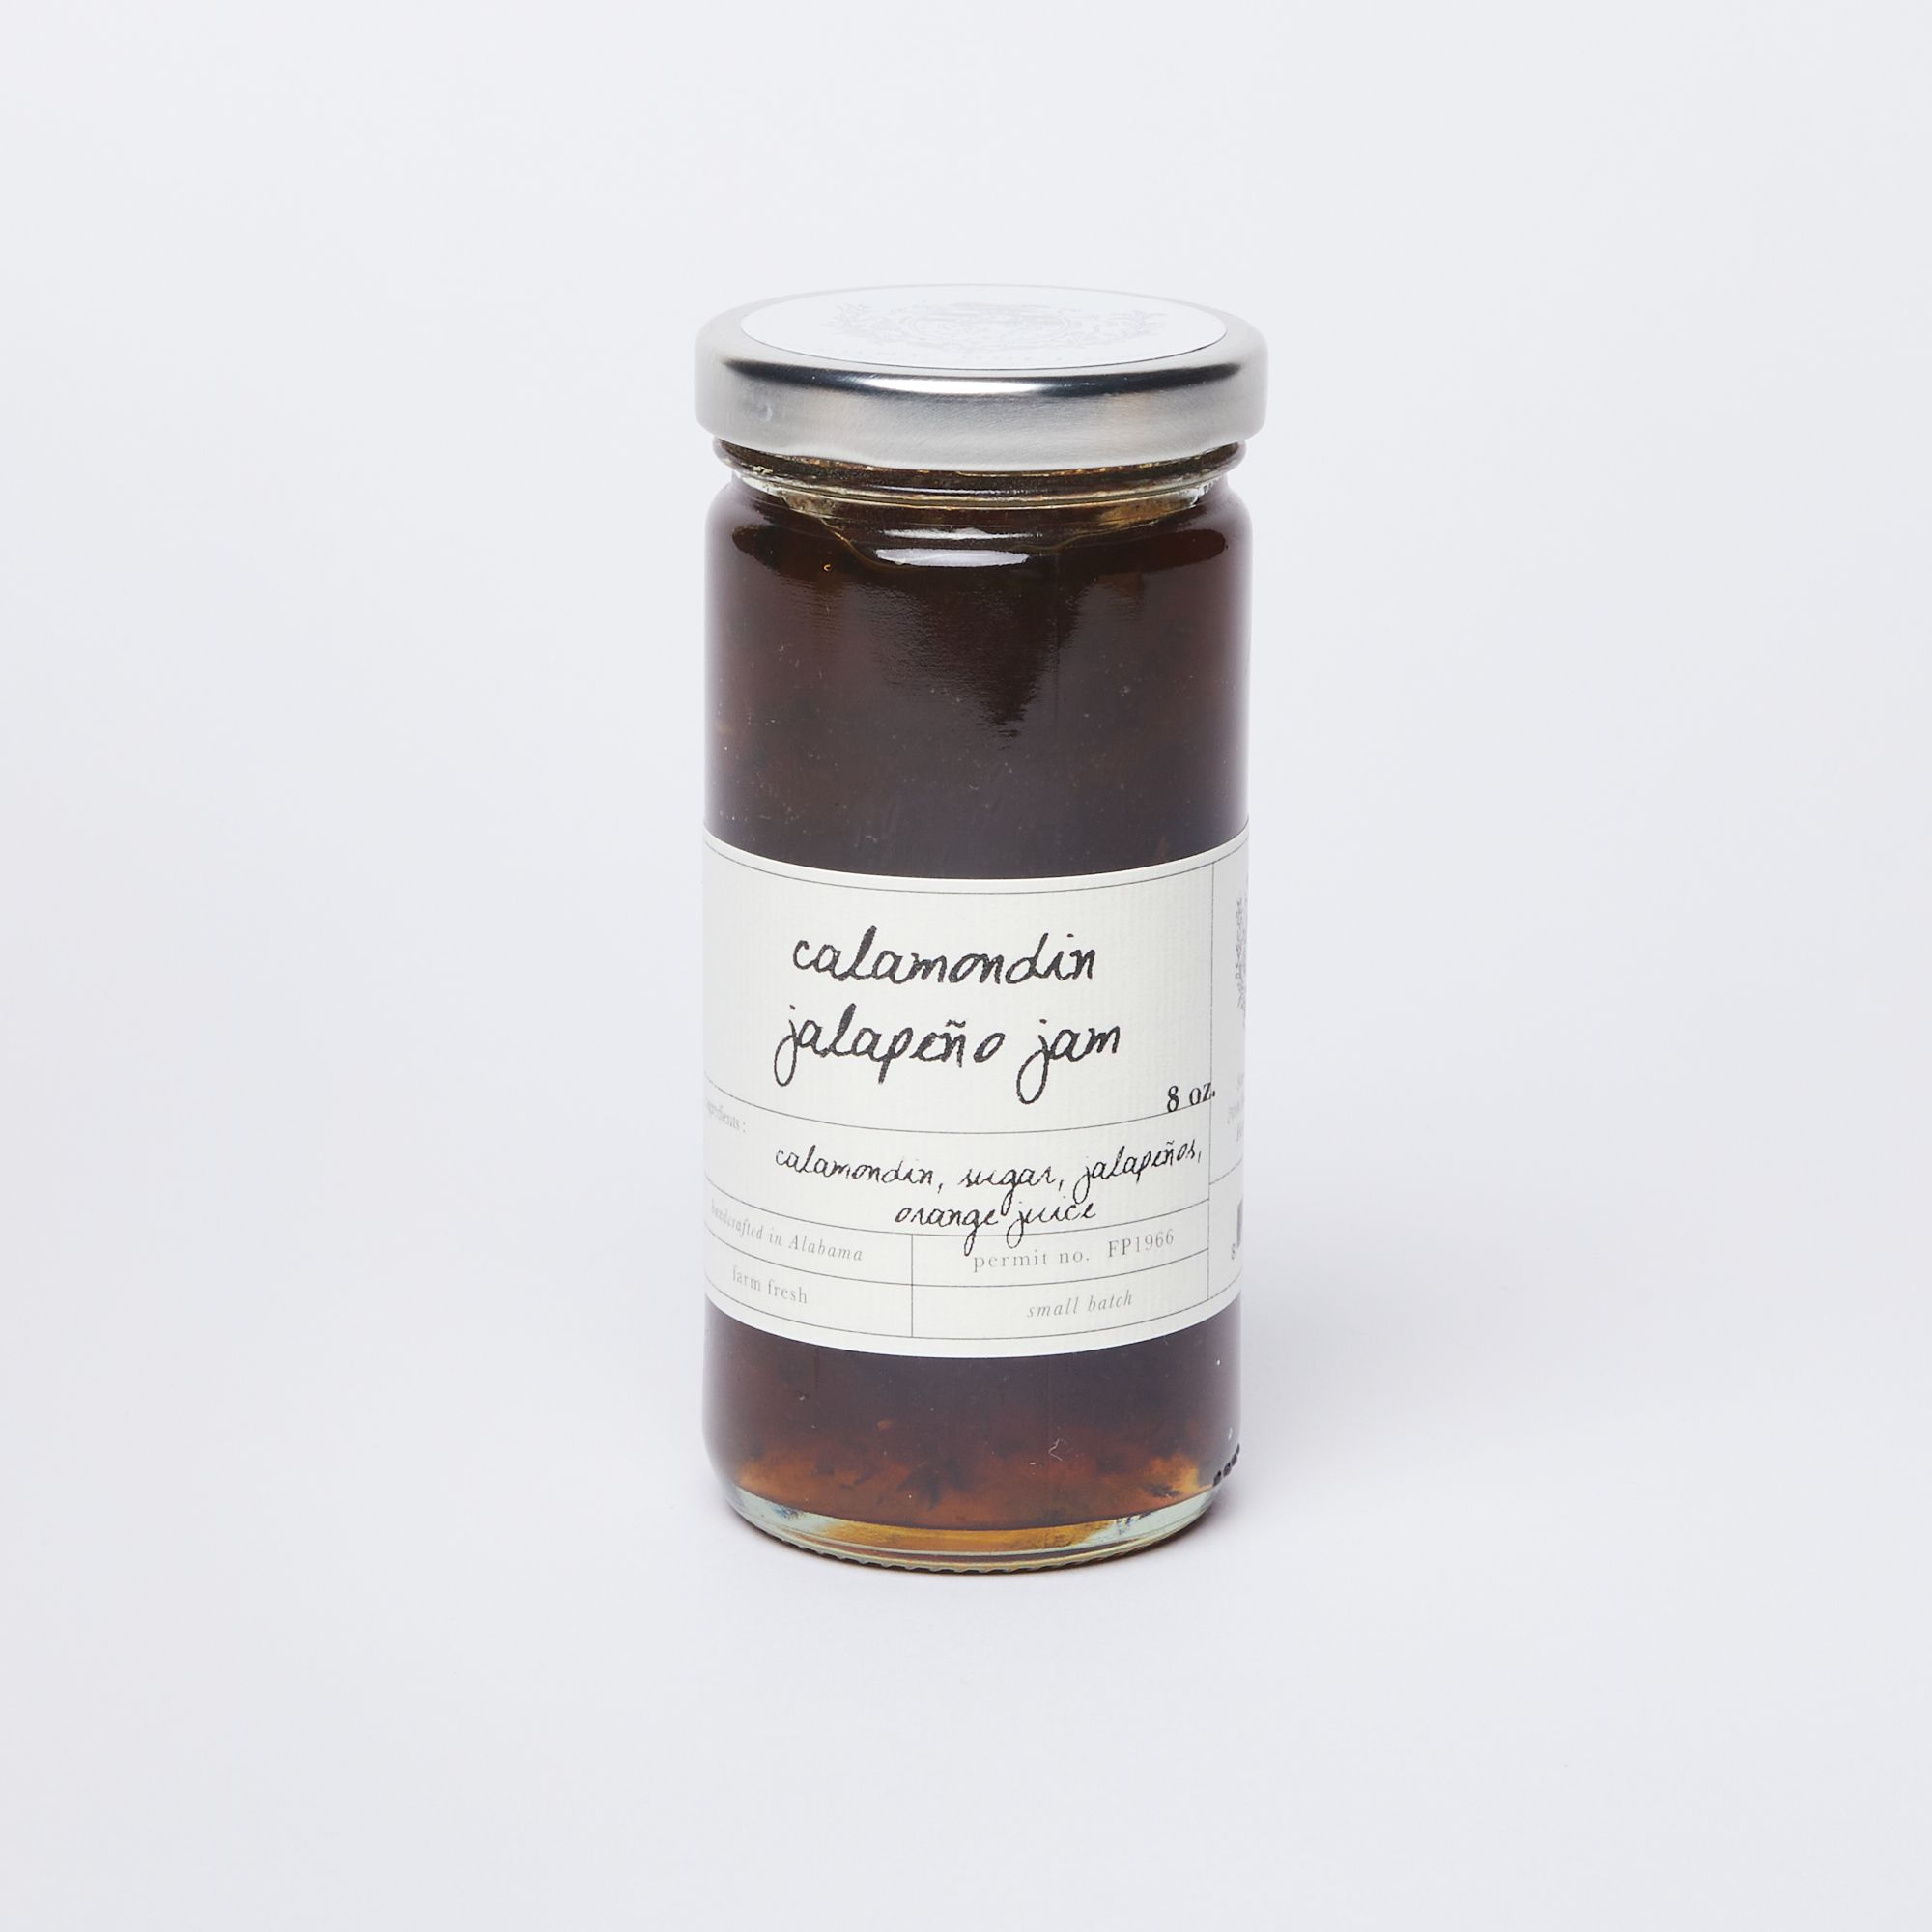 A clear glass jar full of amber colored jam with a silver lid and a white label that reads "Calamondin Jalapeño Jam"